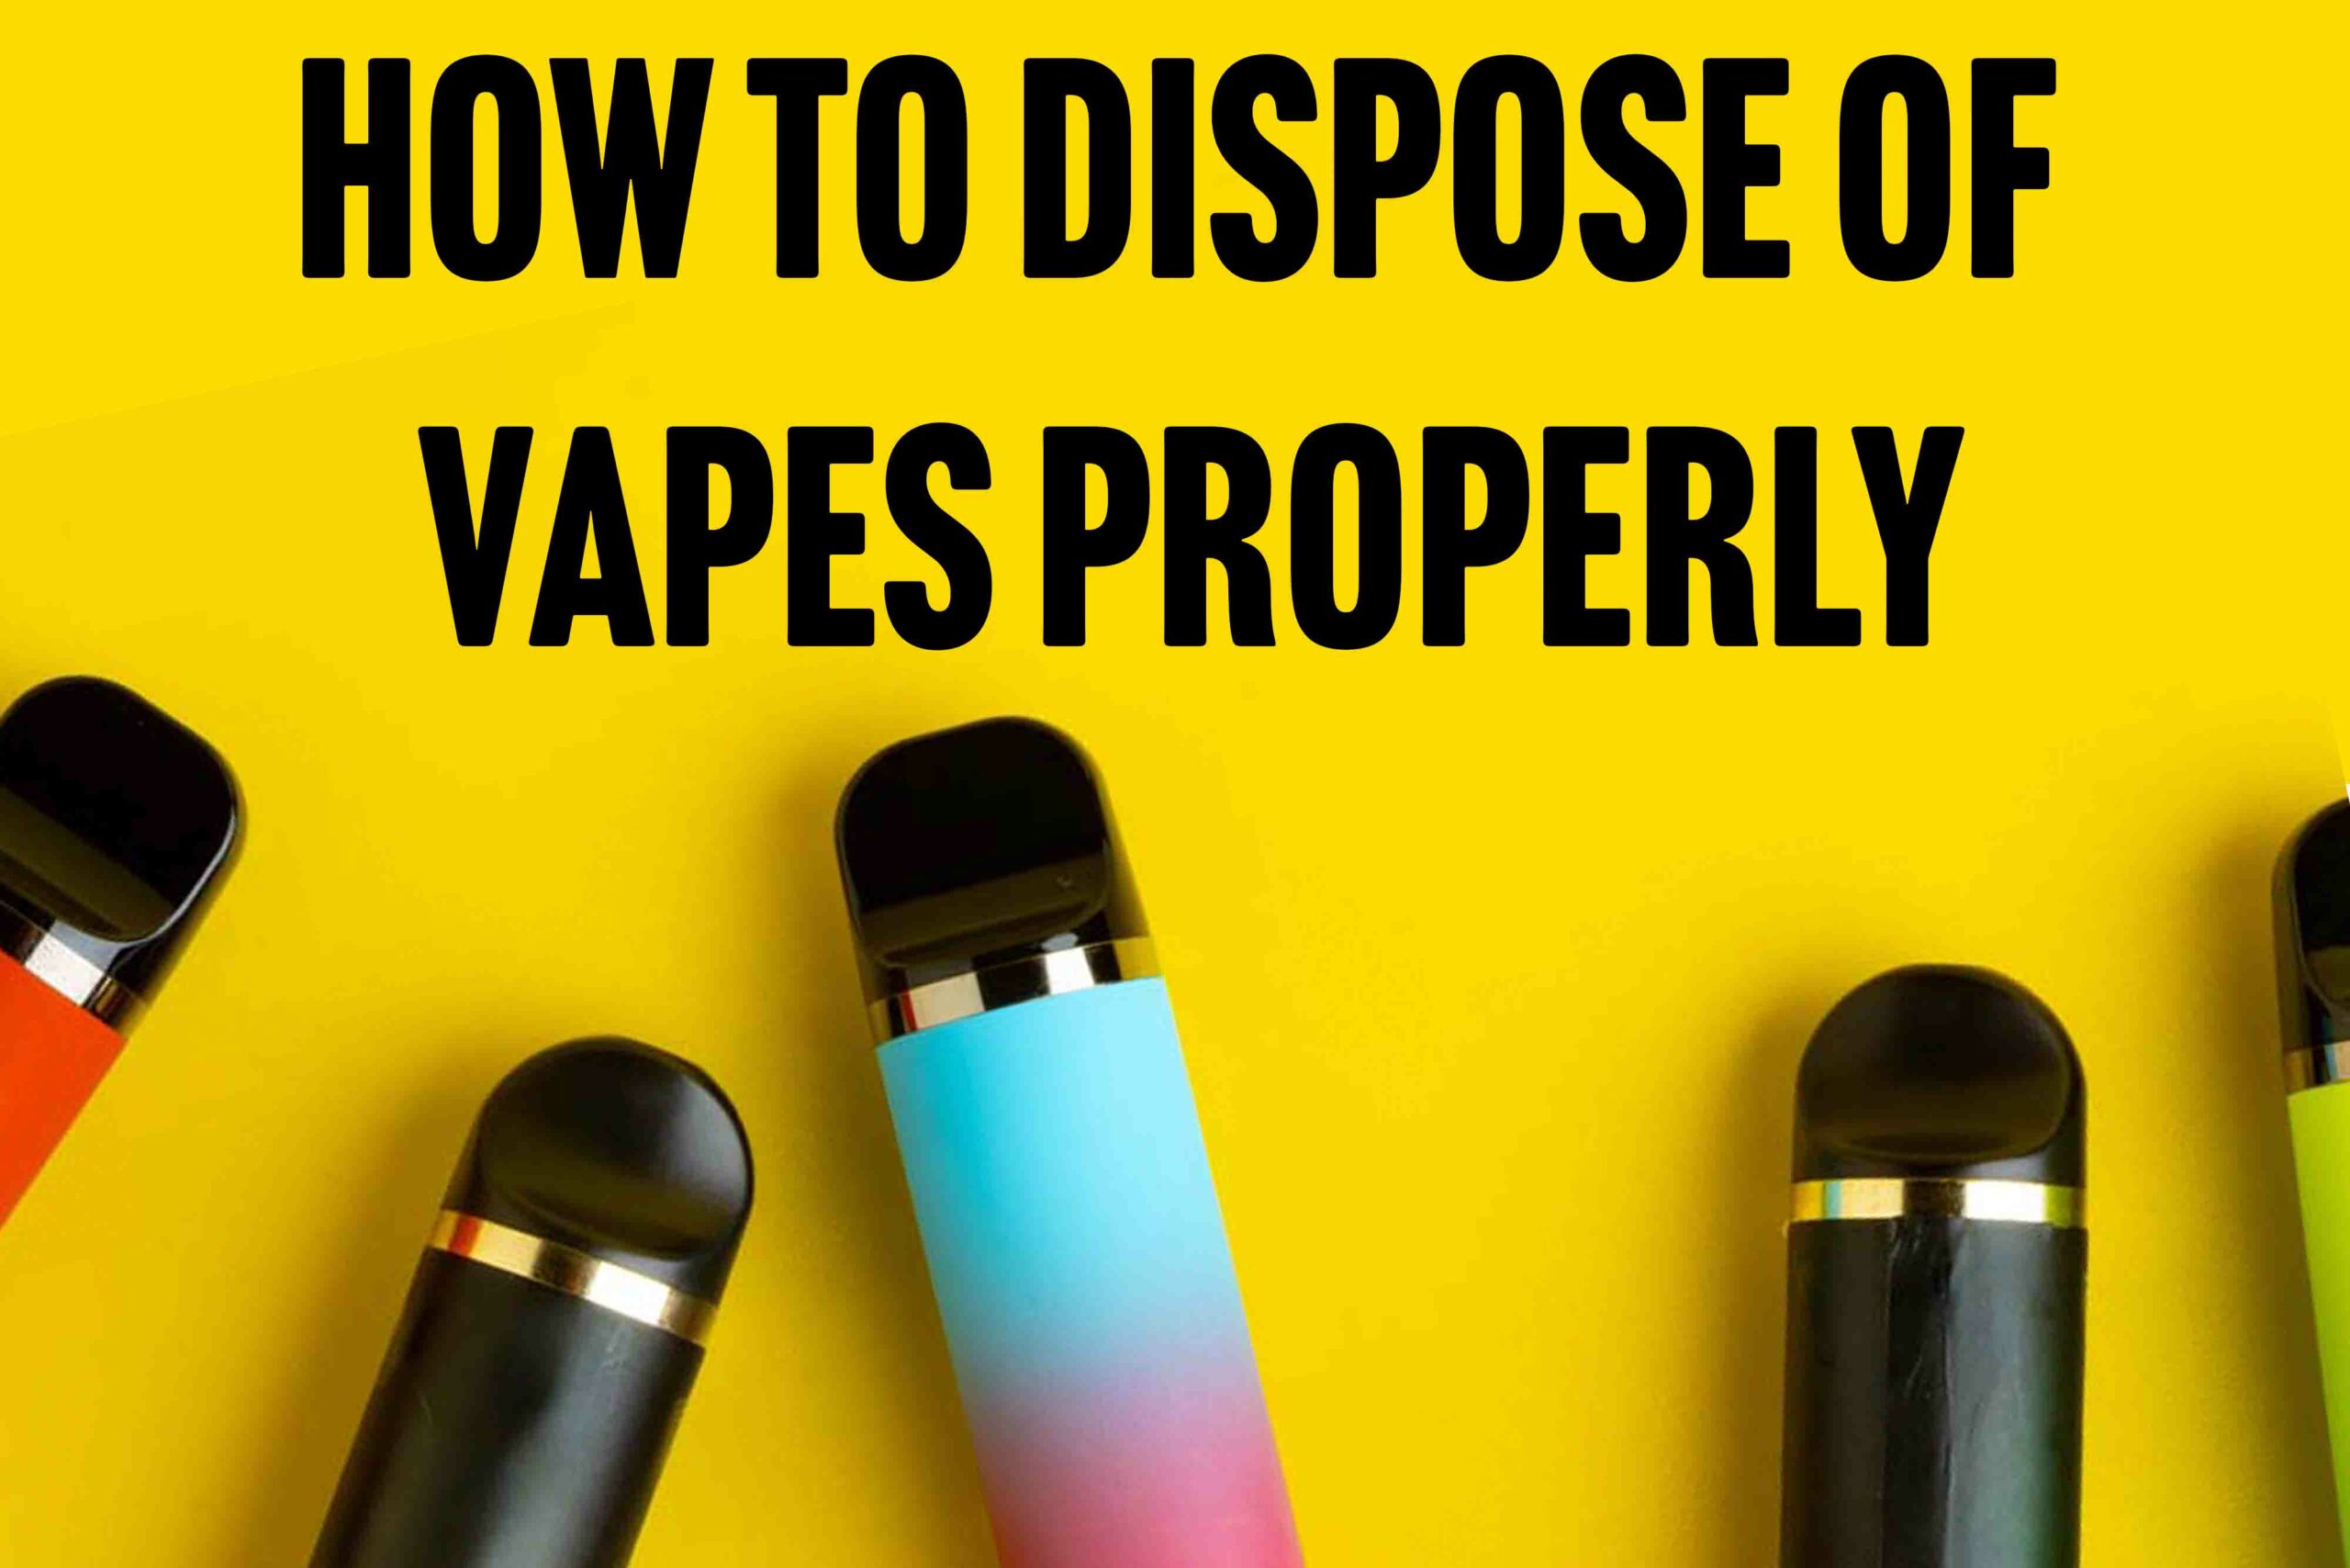 How to dispose of vapes